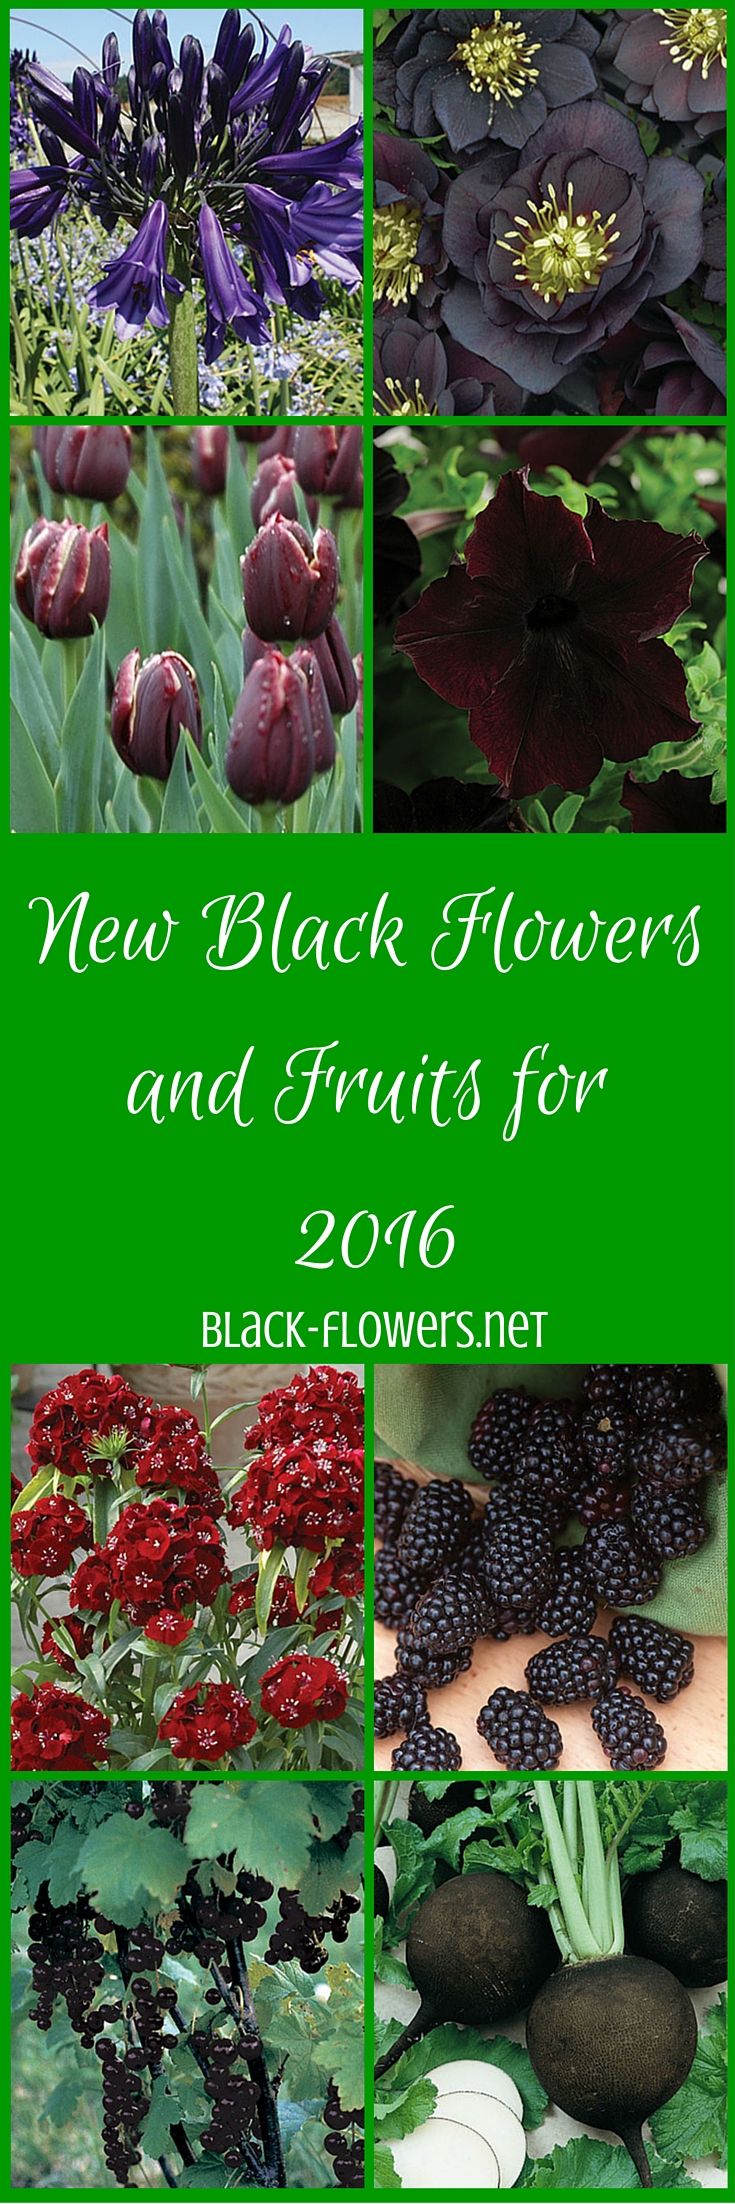 New Black Flowers and Fruits for 2016